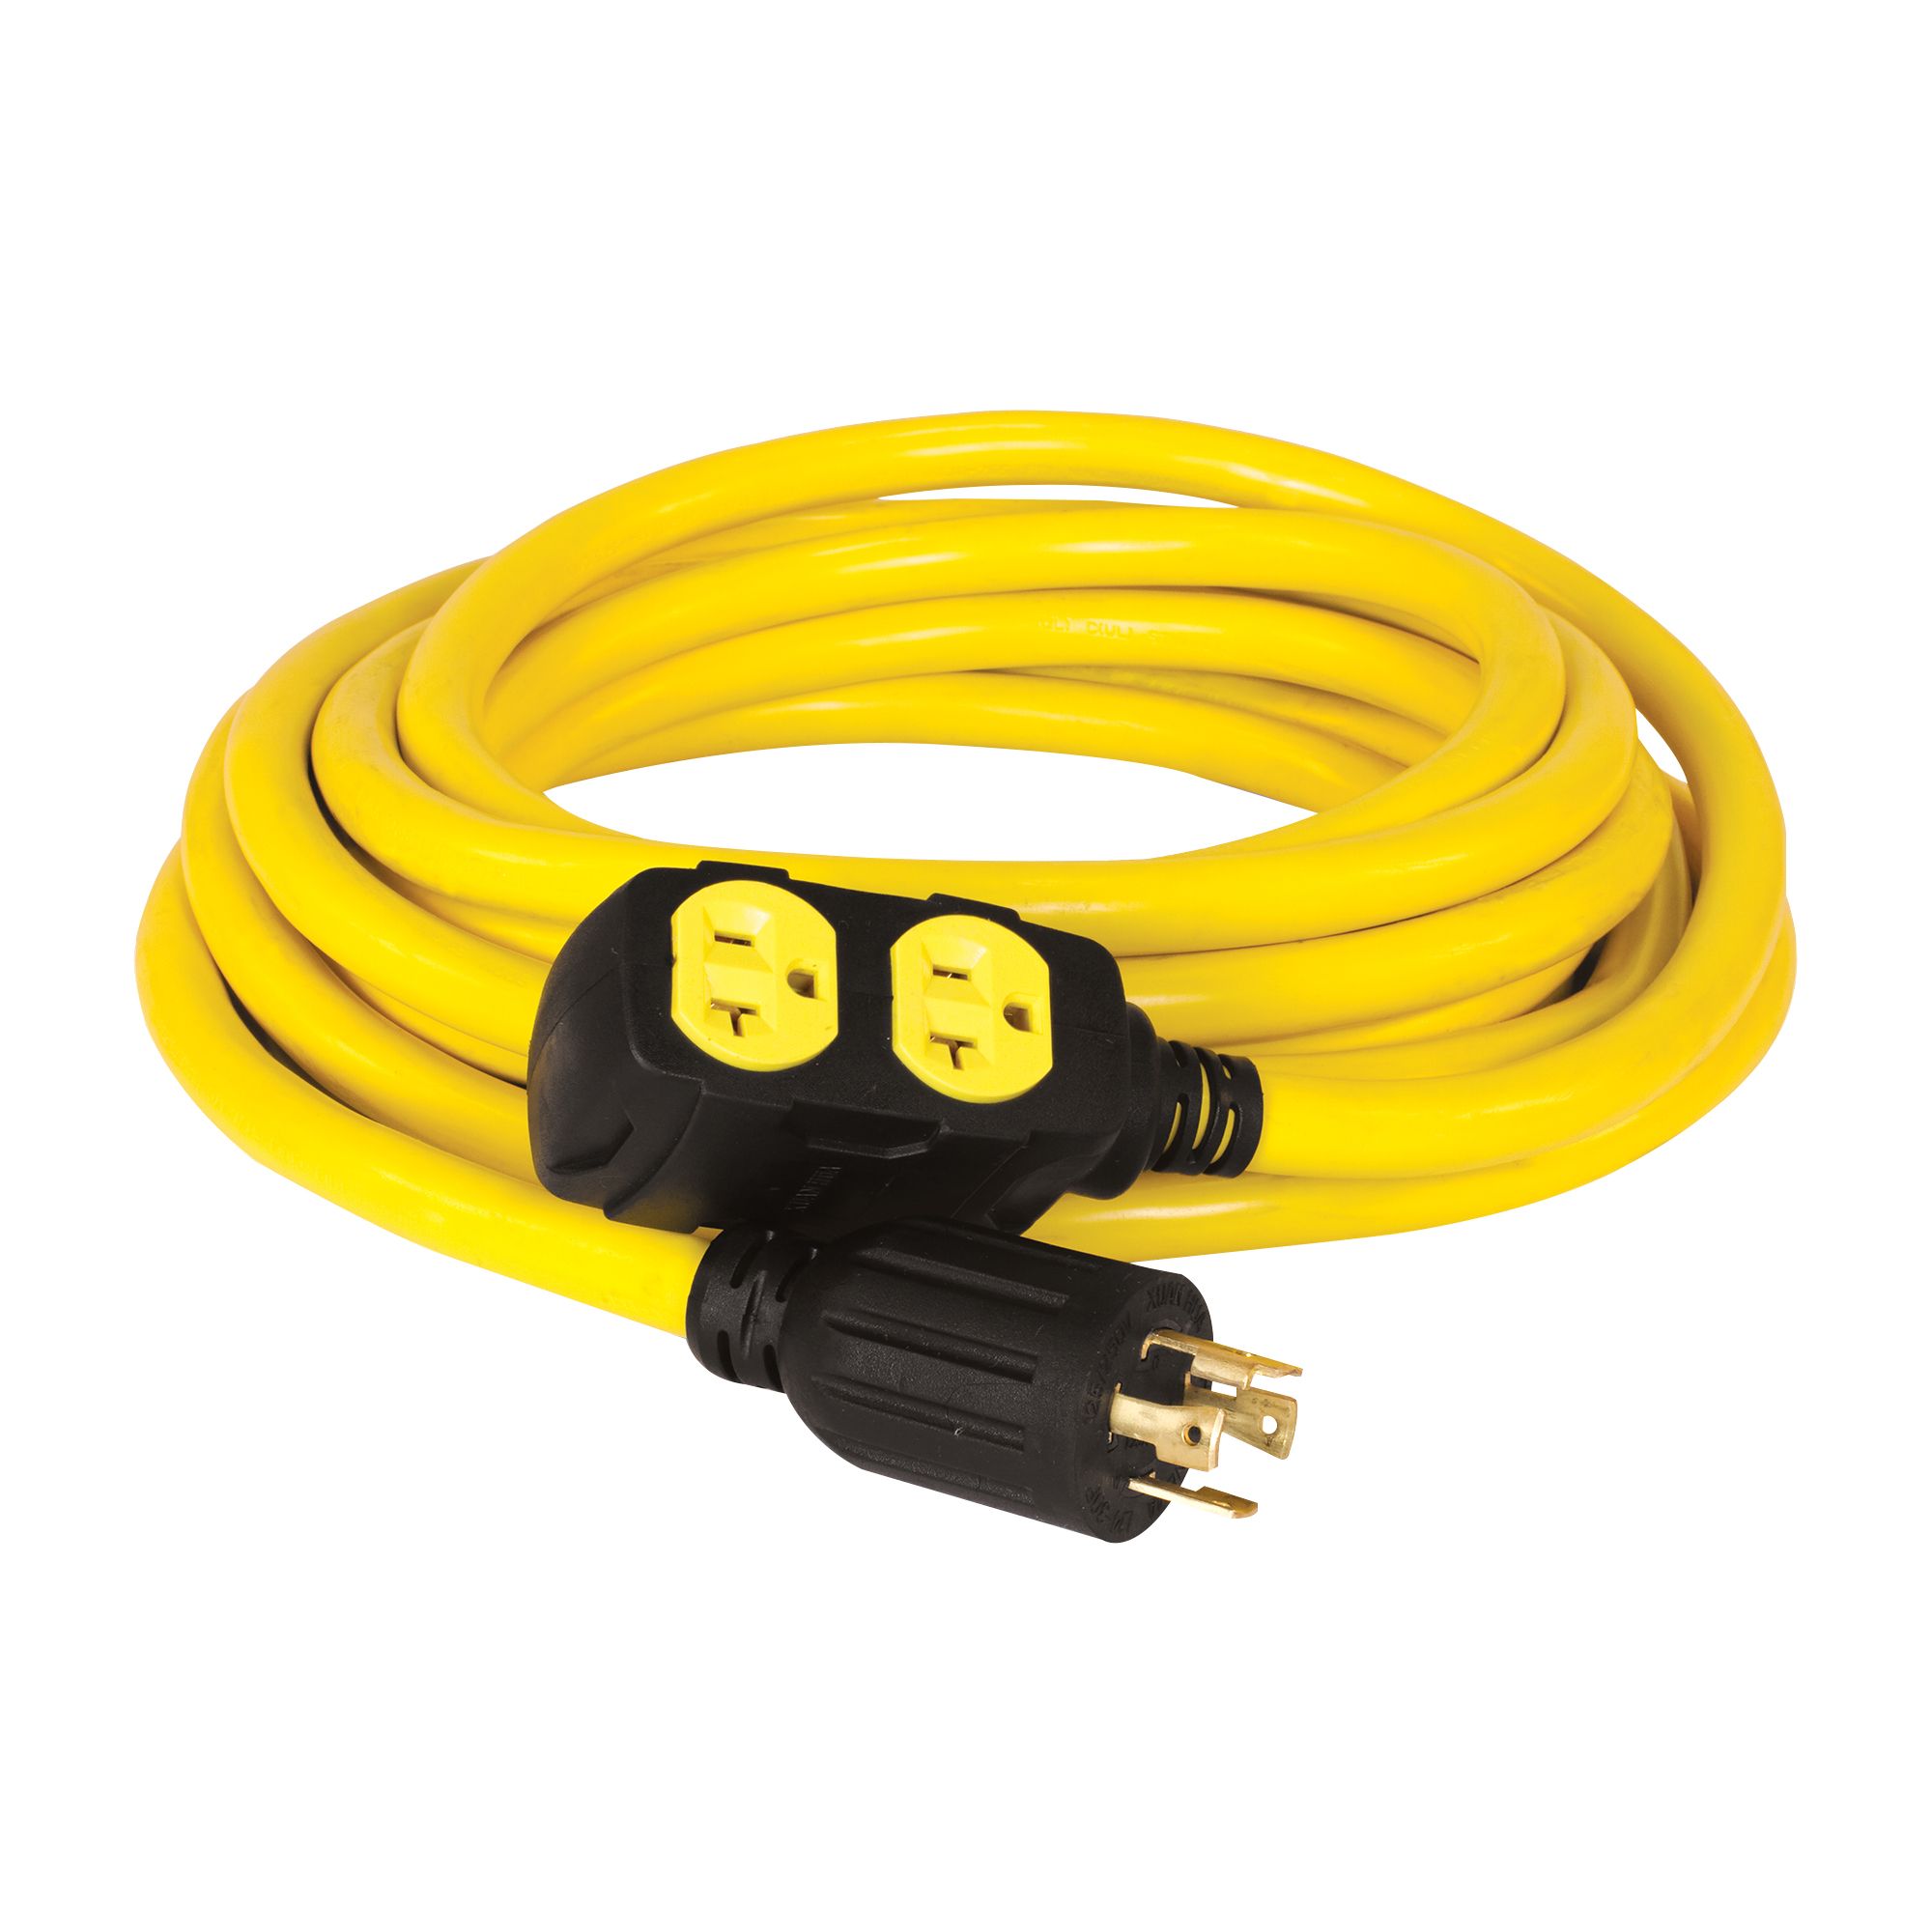 Champion 25-Foot 30-Amp 125/250-Volt Duplex-Style Generator Extension Cord (L14-30P to four 5-20R)